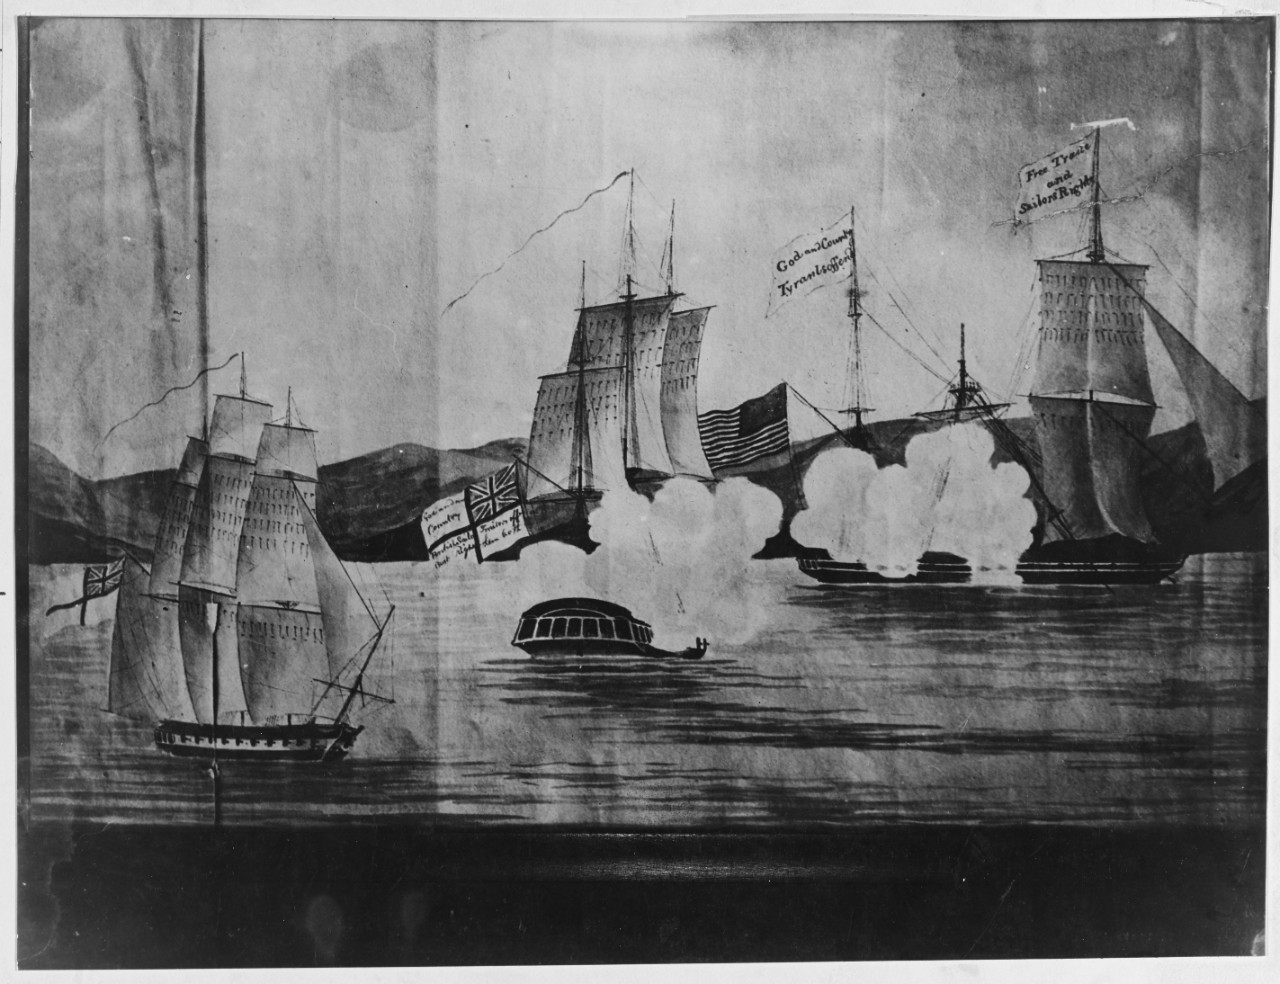 U.S.S. ESSEX and Her Prizes--Battle between the U.S.S. ESSEX under Captain David Porter and the H.M.S. PHOEBE and CHERUB off Valparaiso, Chile, March 28, 1814. 